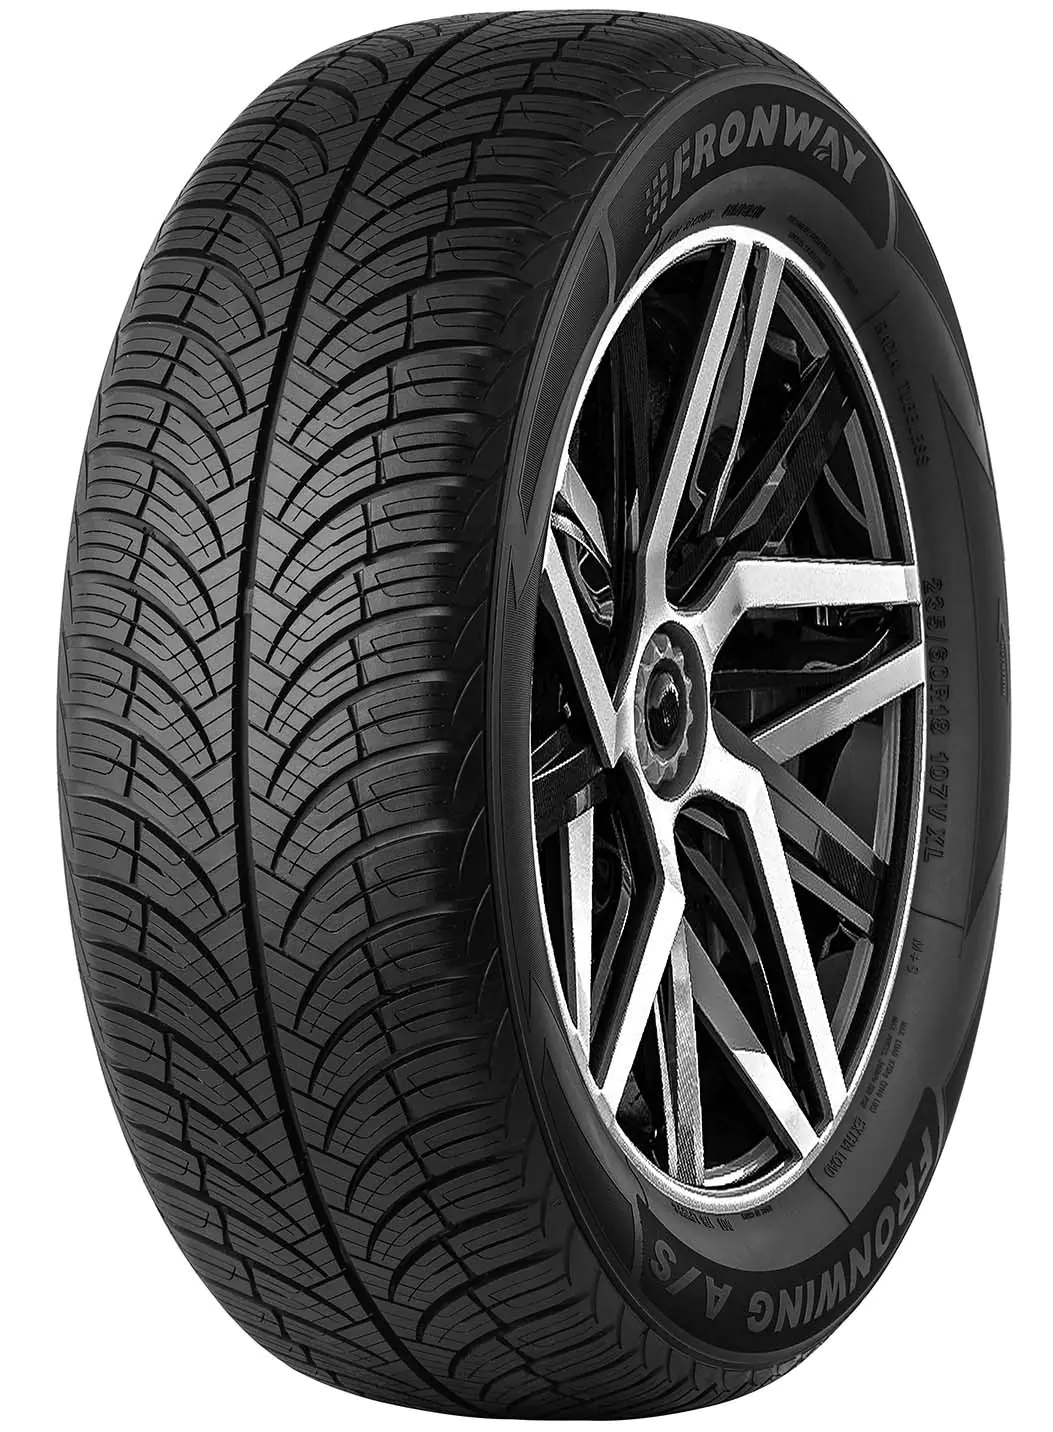 Fronway Fronway 145/80 R13 75T FRONWING A/S pneumatici nuovi All Season 